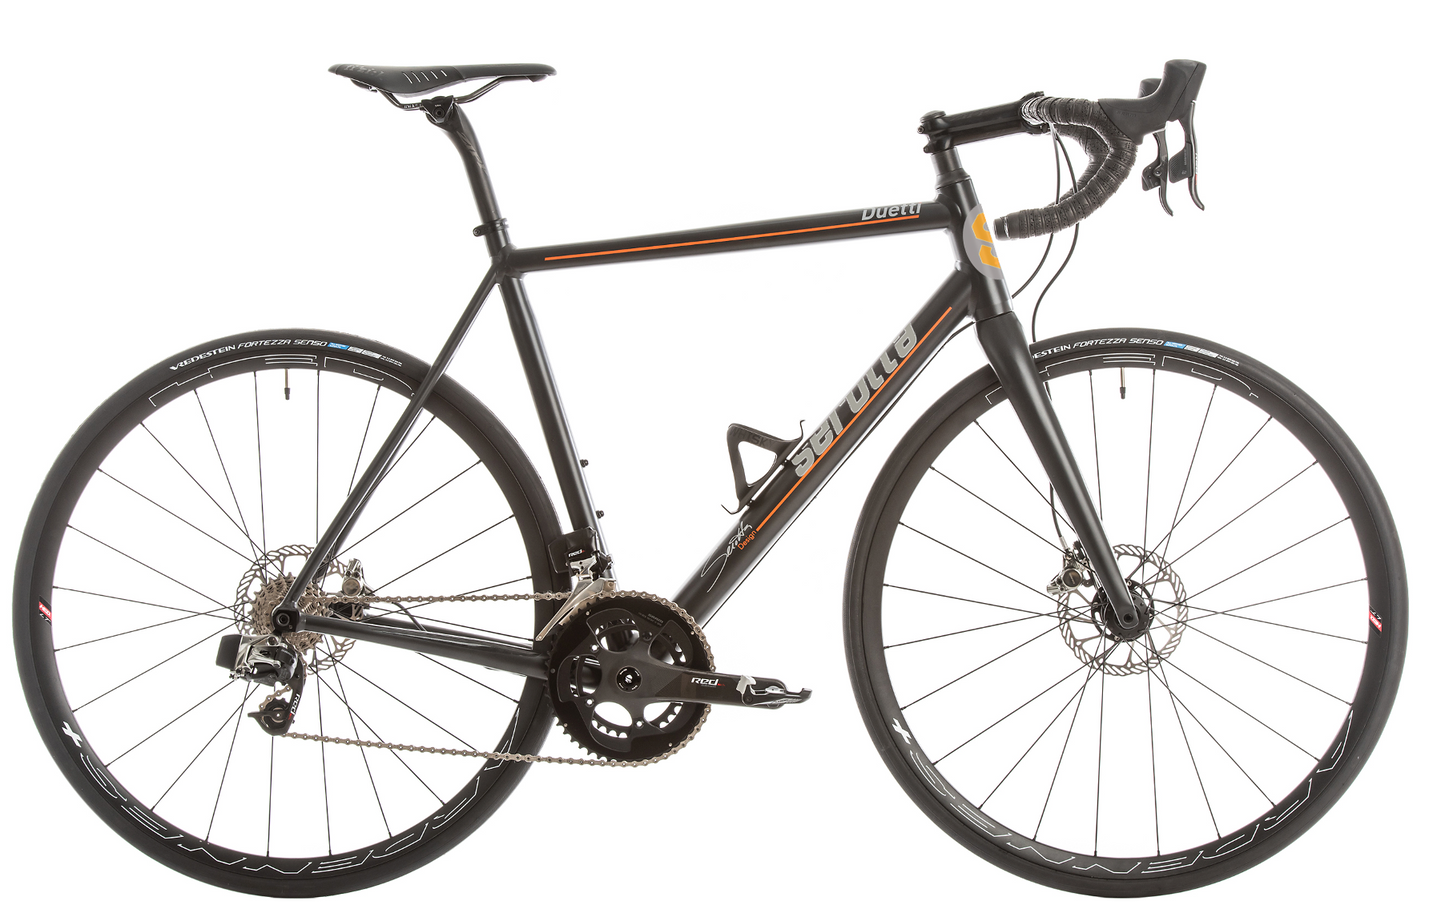 Duetti A9 Complete Bike WITH SRAM RIVAL WIRELESS AXS 12-SPD FROM $2995!